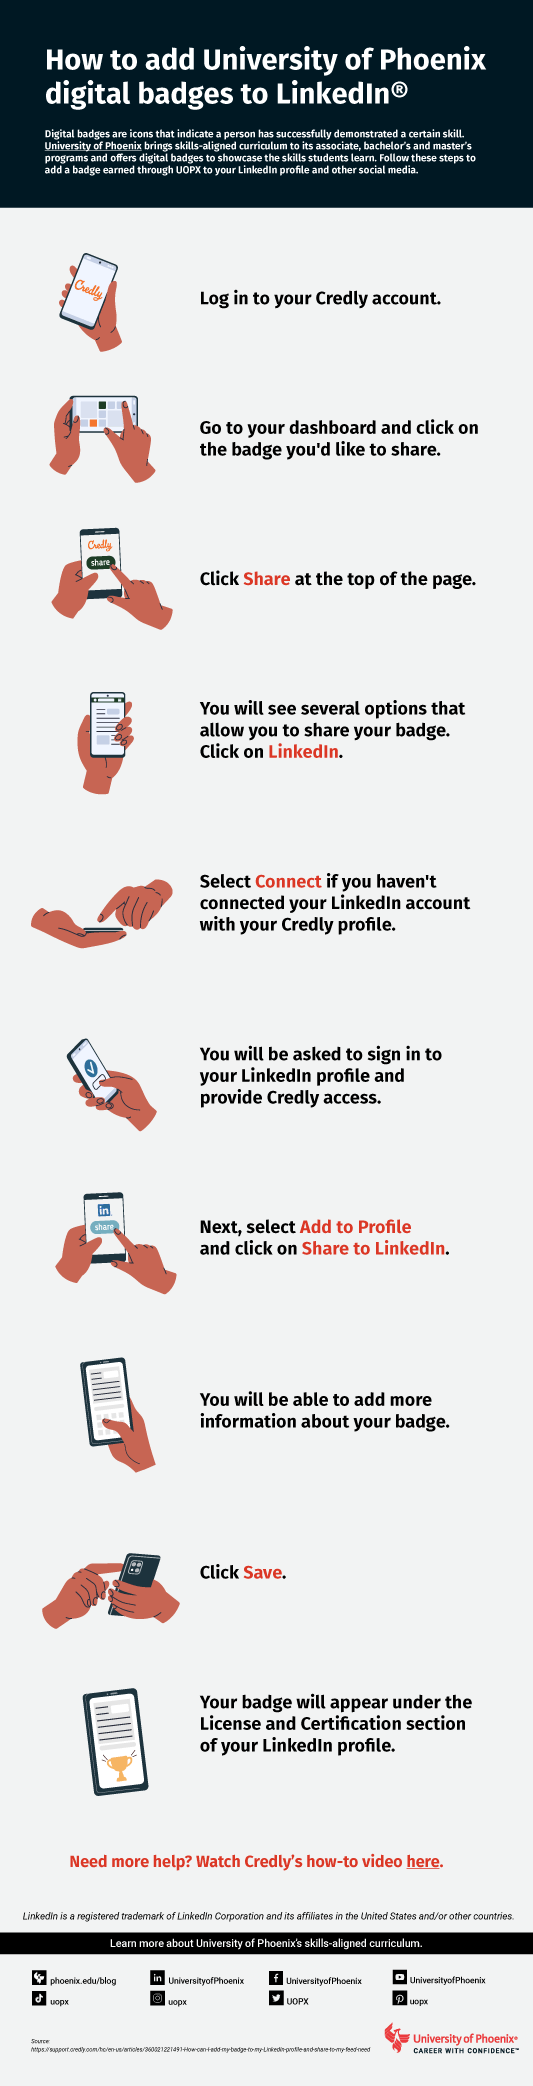 How to add University of Phoenix digital badges to LinkedIn infographic